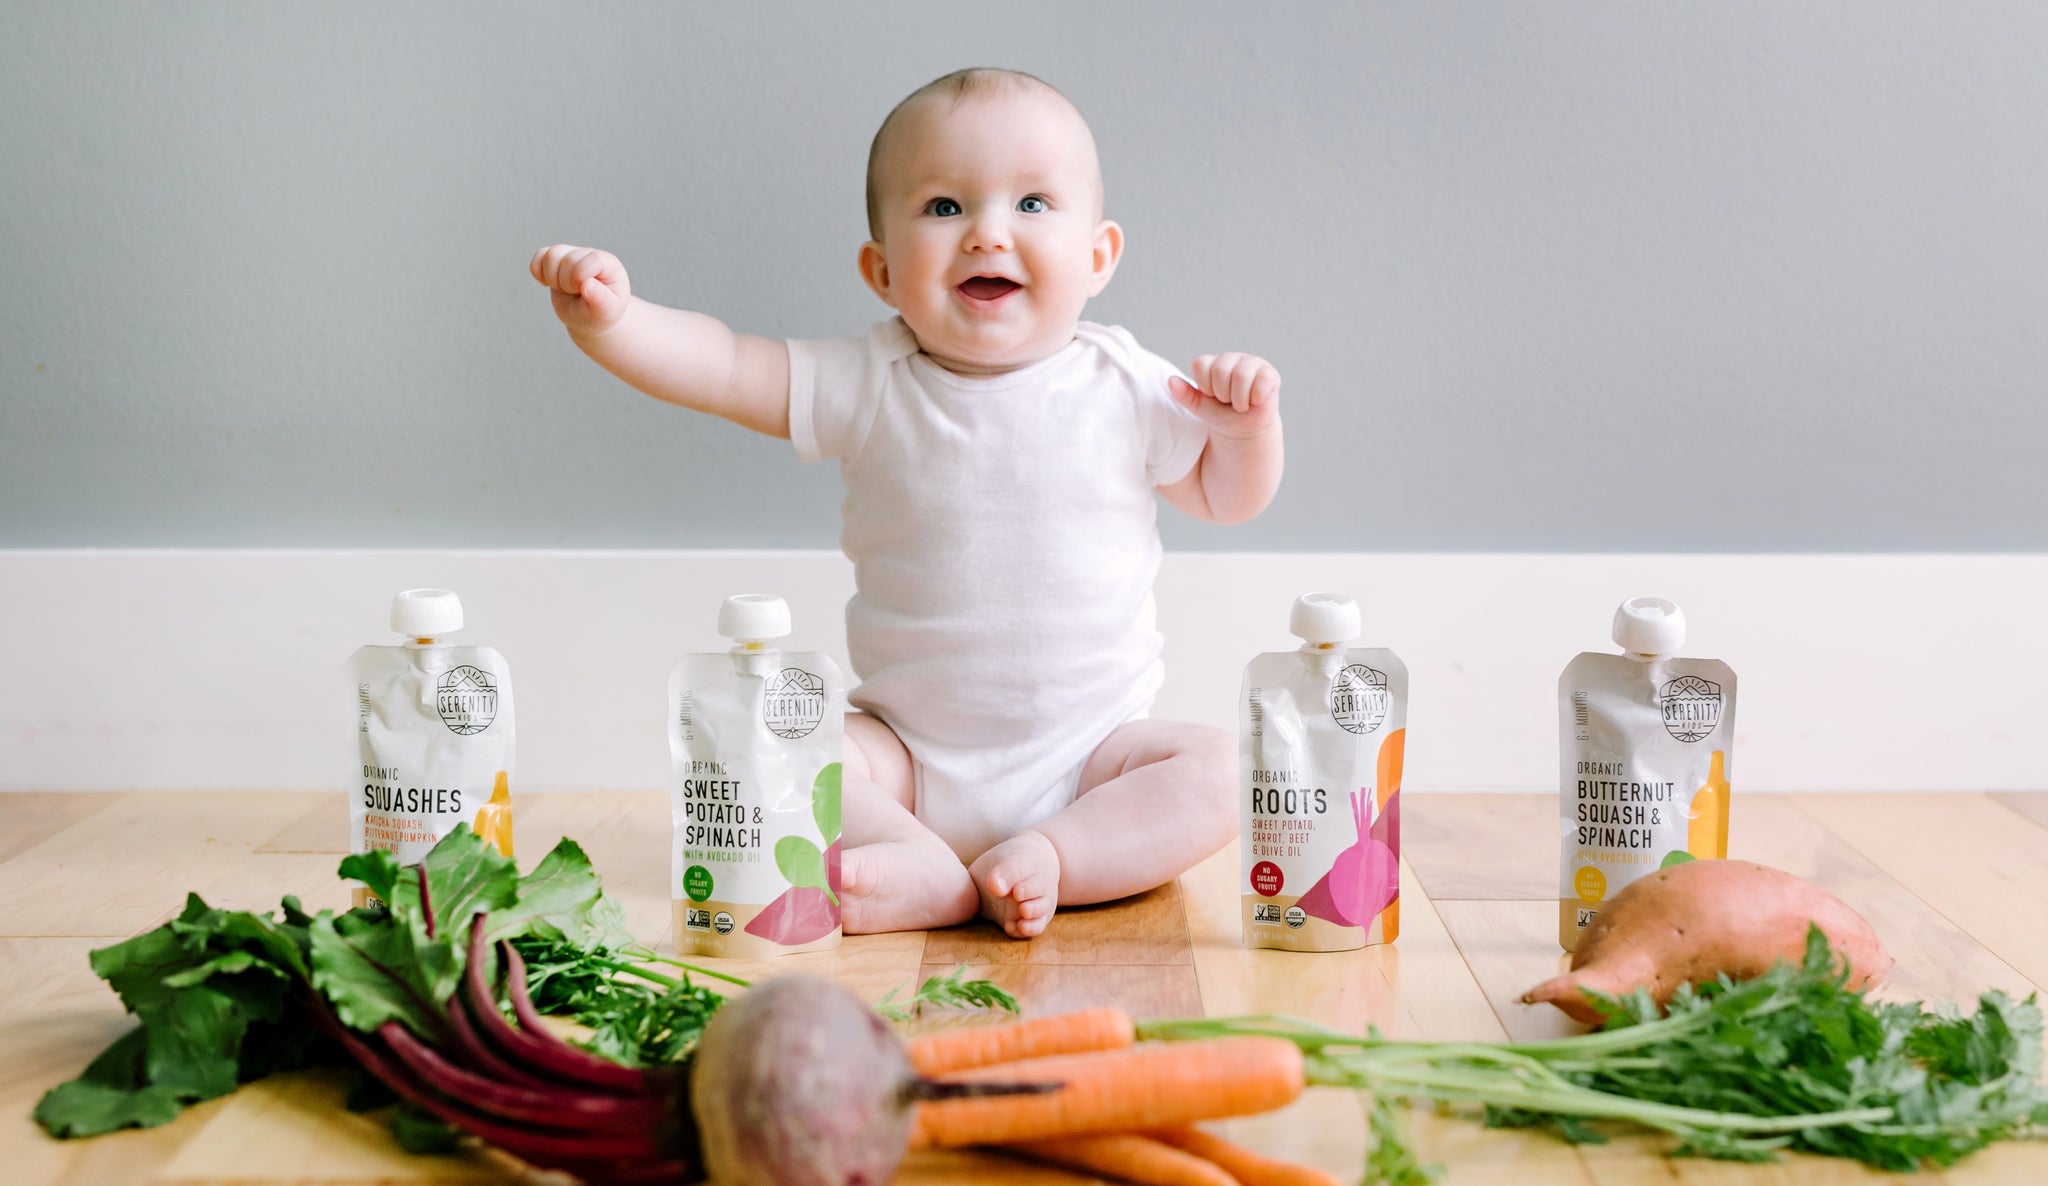 Serenity Kids at Expo West (N119) & Announces National Launch in Whole Foods Market